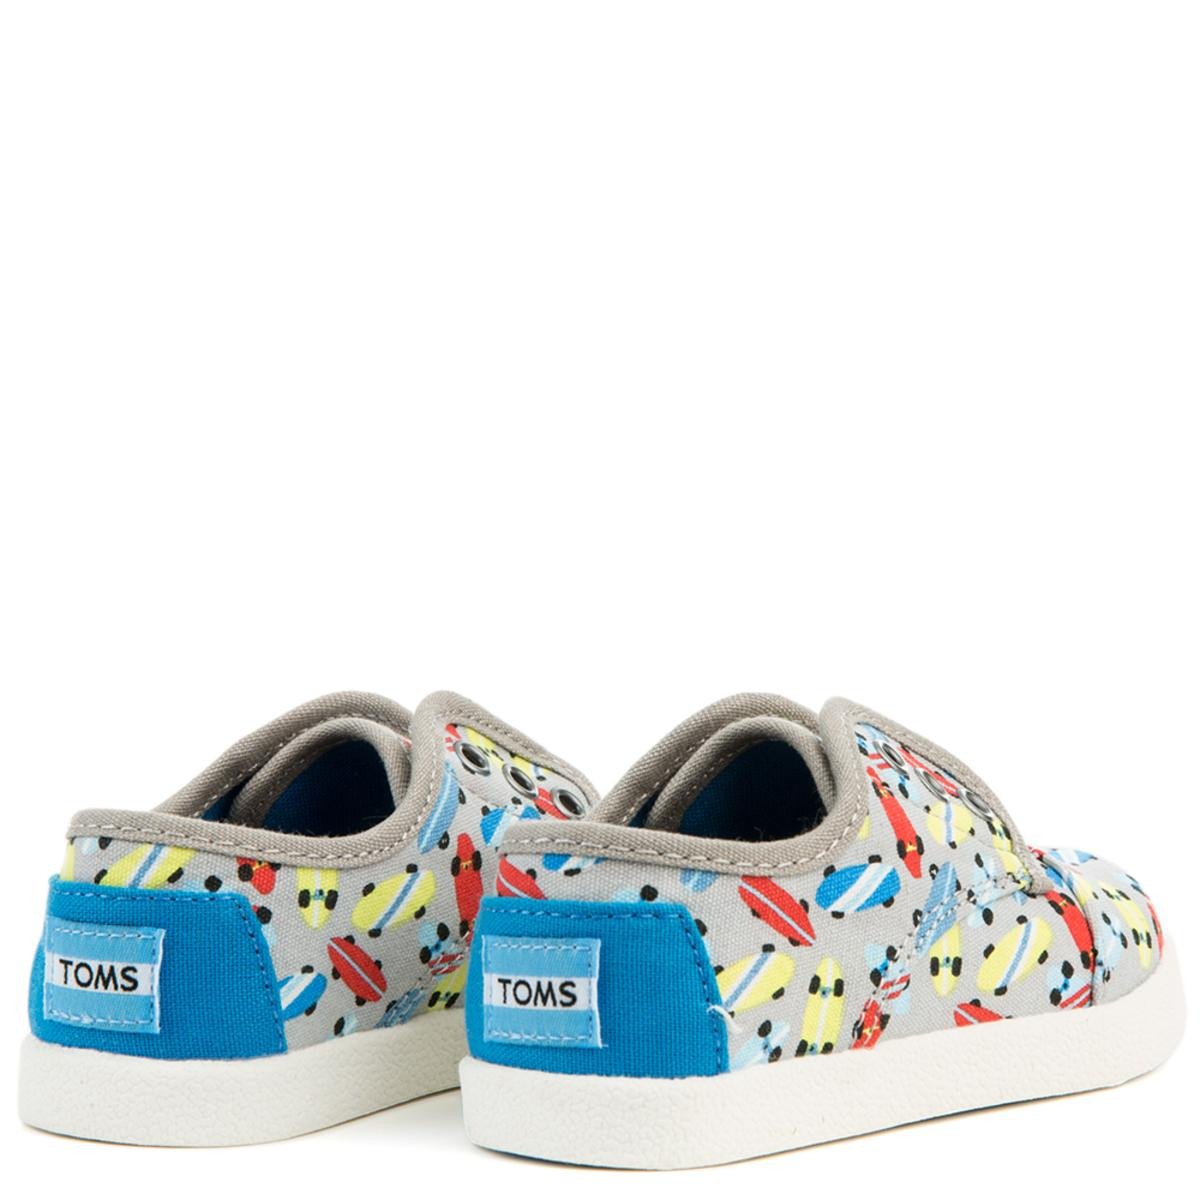 Tiny Toms Skateboard Drissle Grey Paseo Sneakers